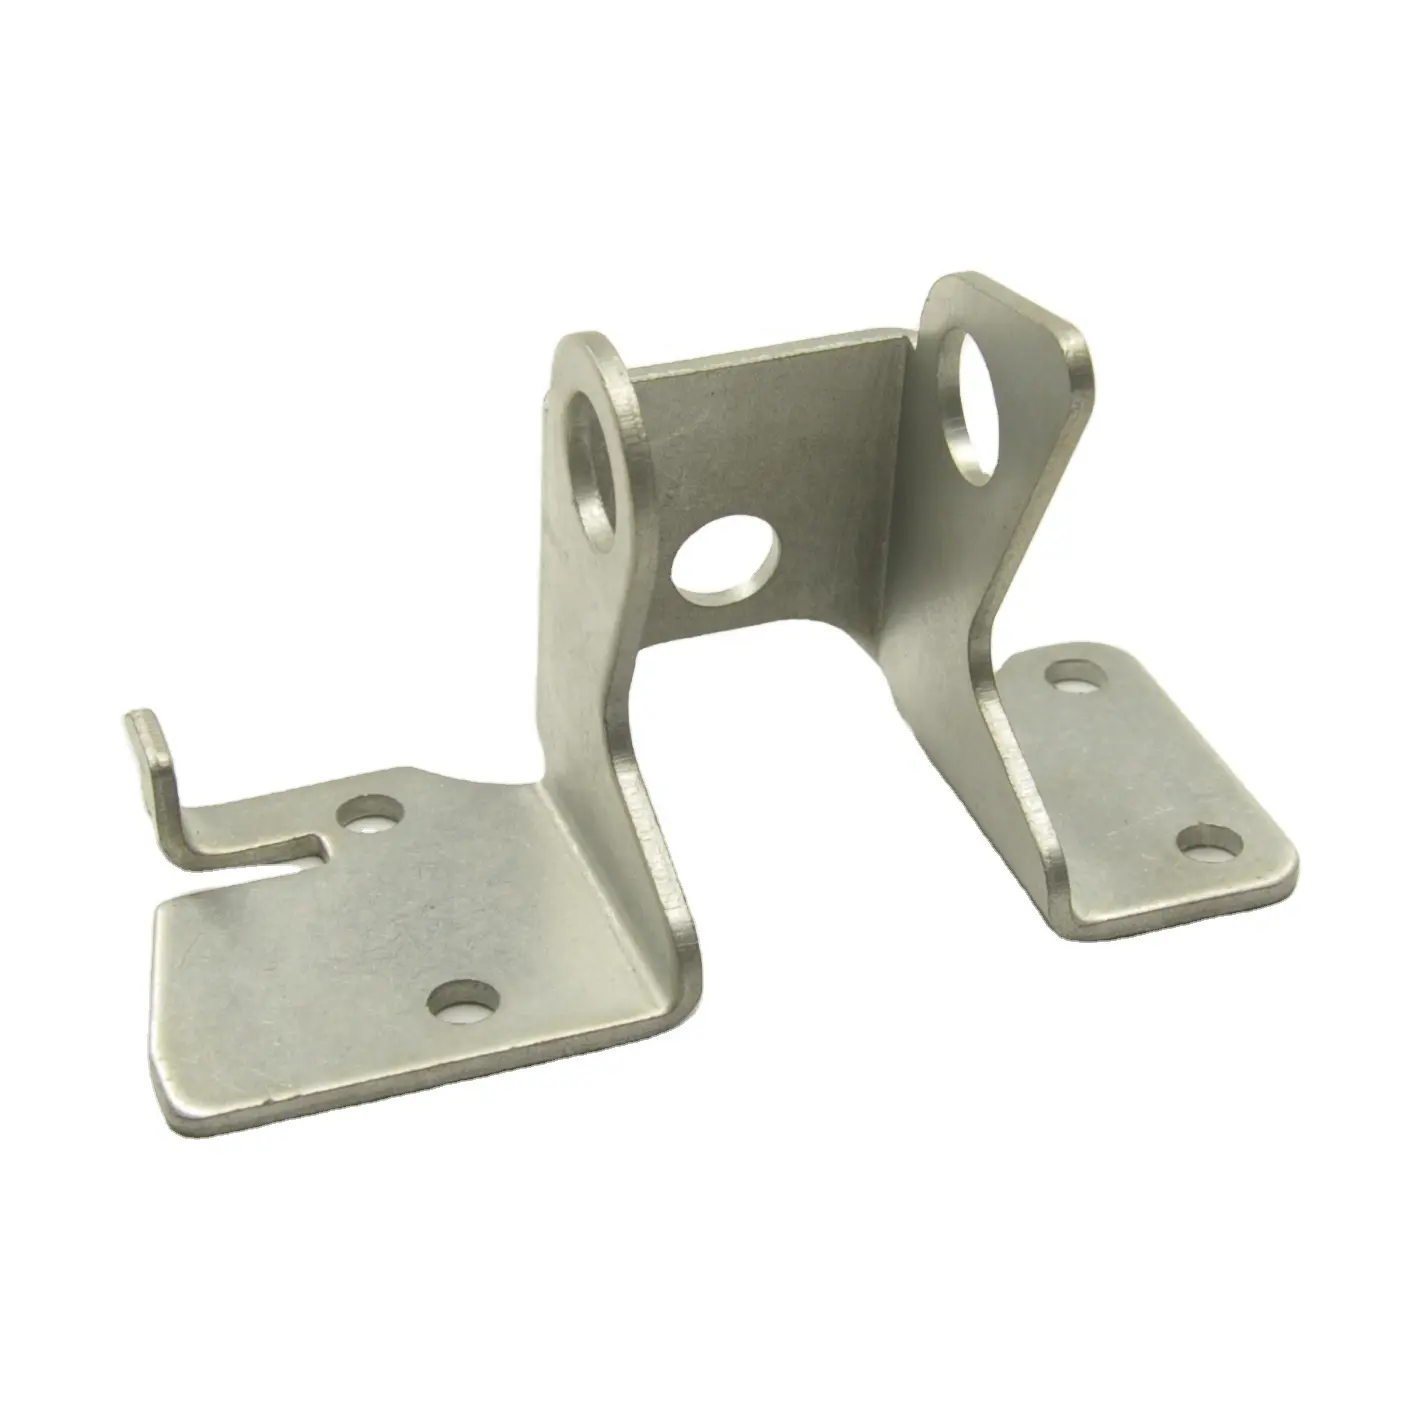 Stamping Parts Hot Sell Cheap Price Customer Made Stainless Steel Stamping Parts Hardware Products Used For Furniture